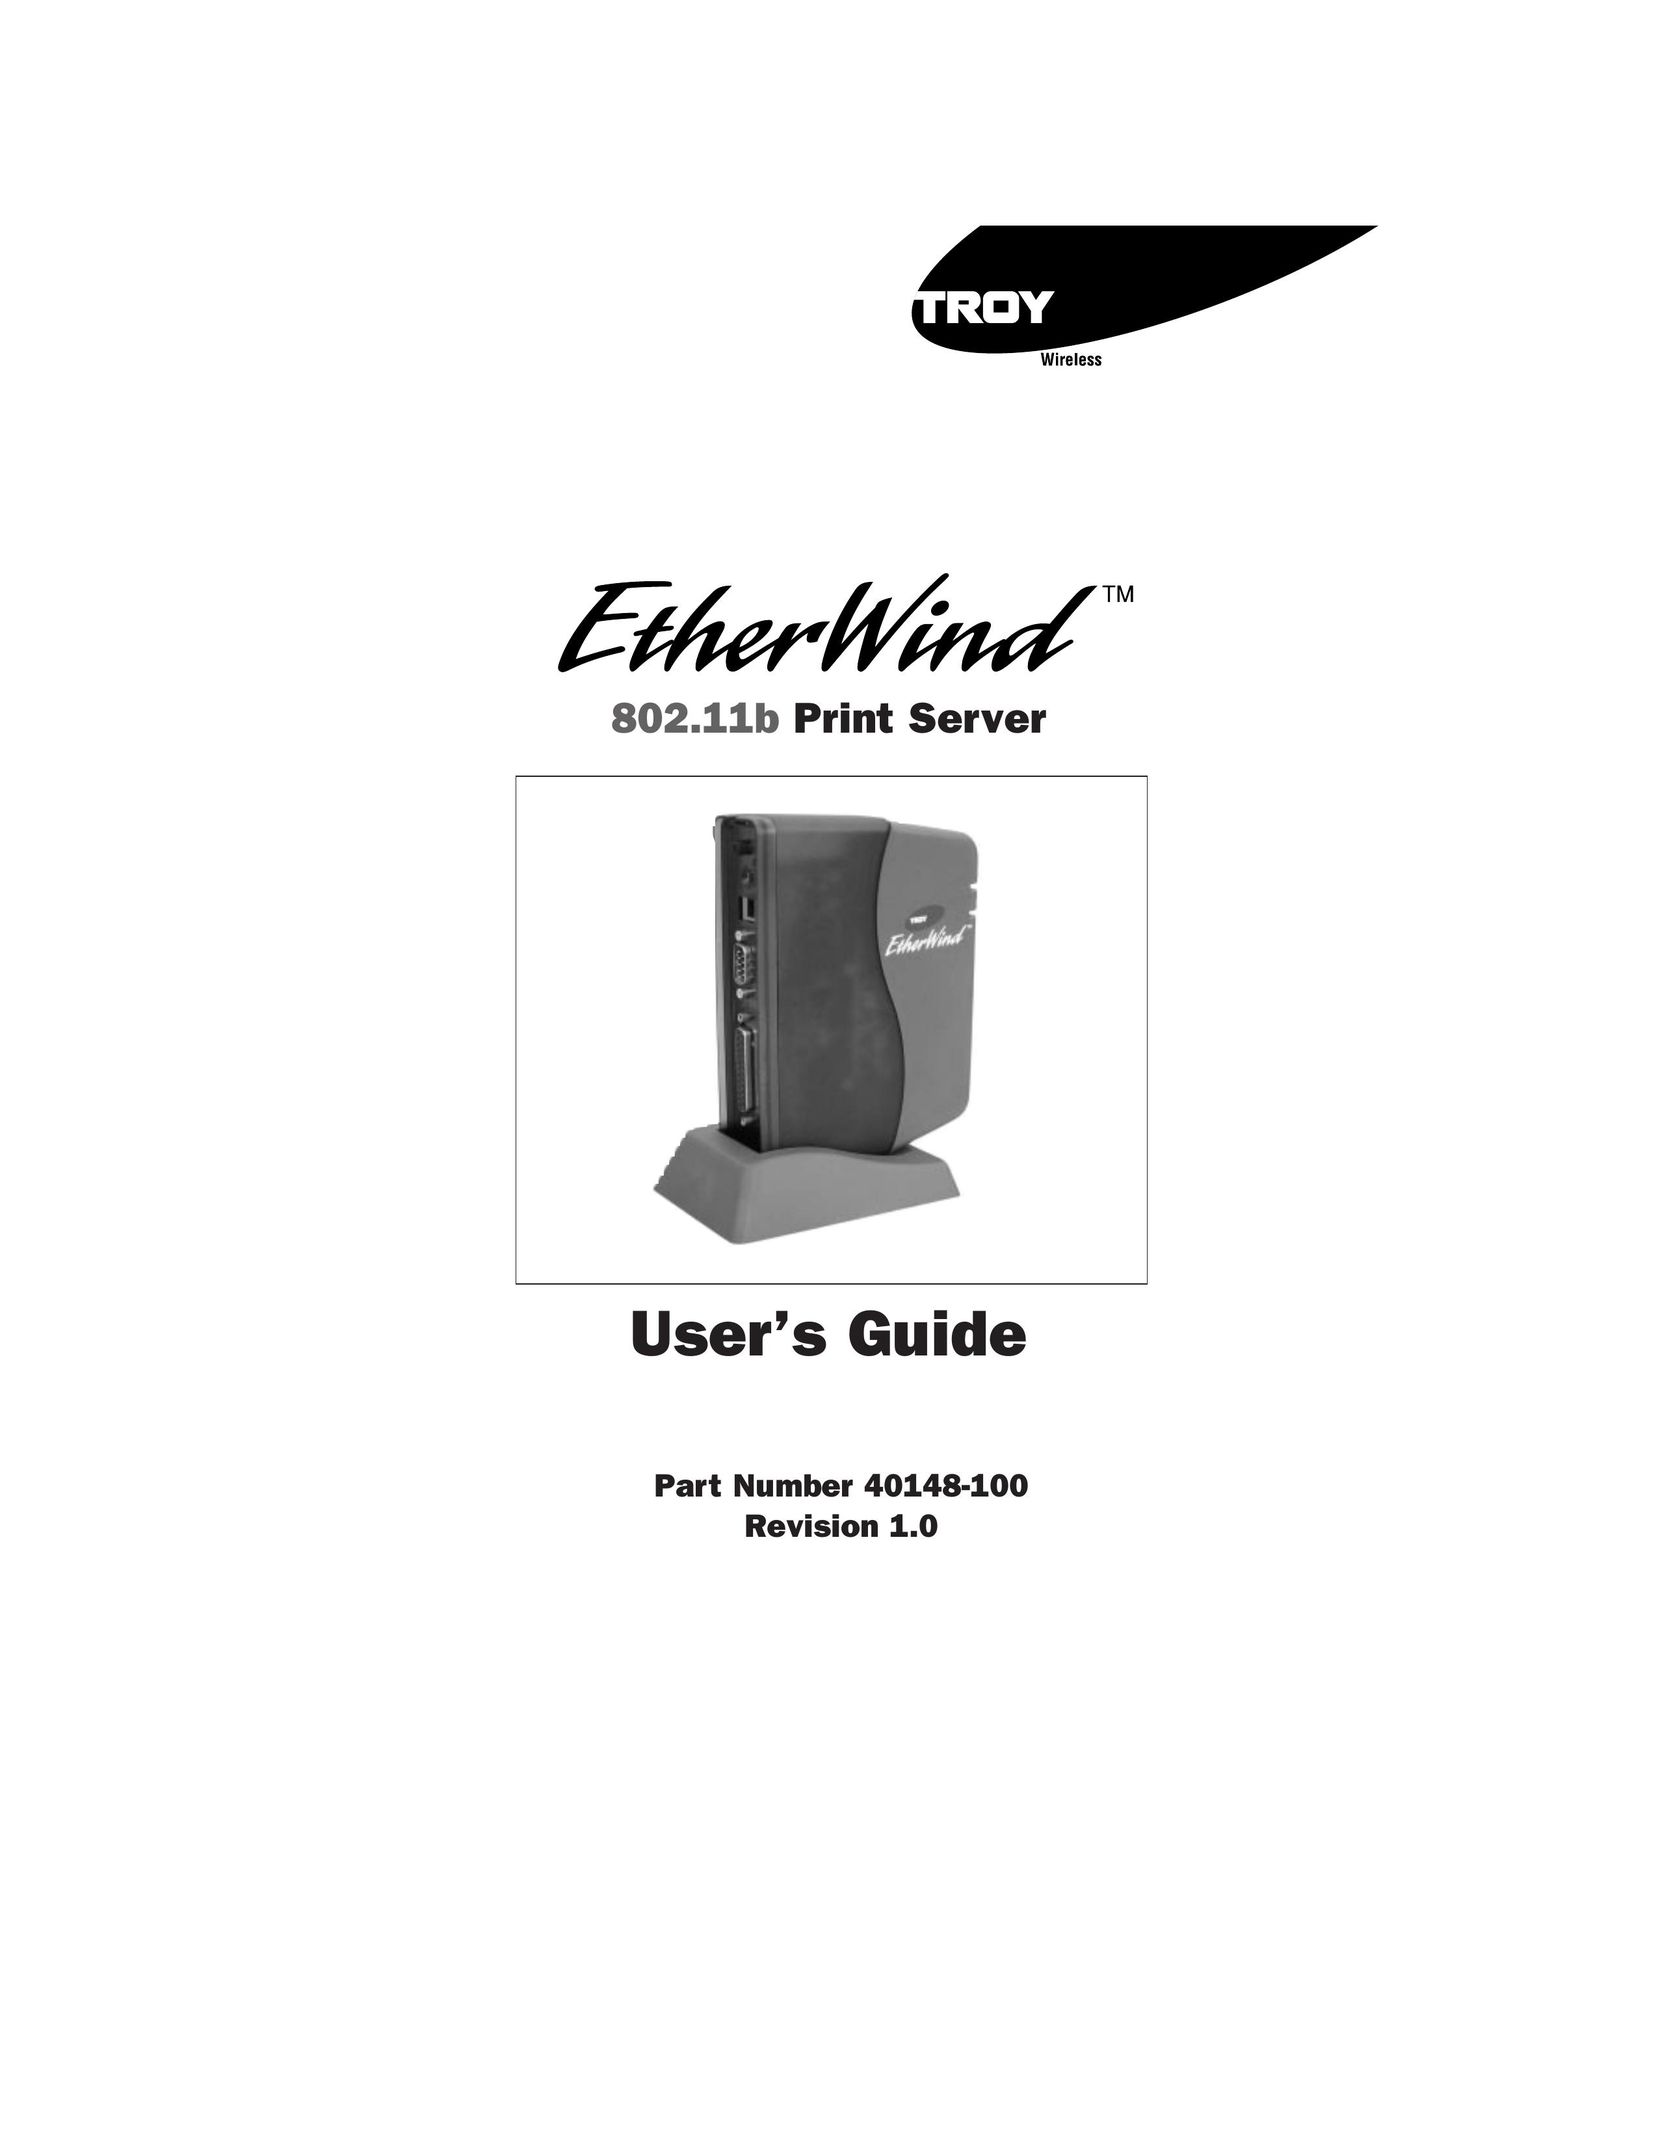 TROY Group 802.11b Network Card User Manual